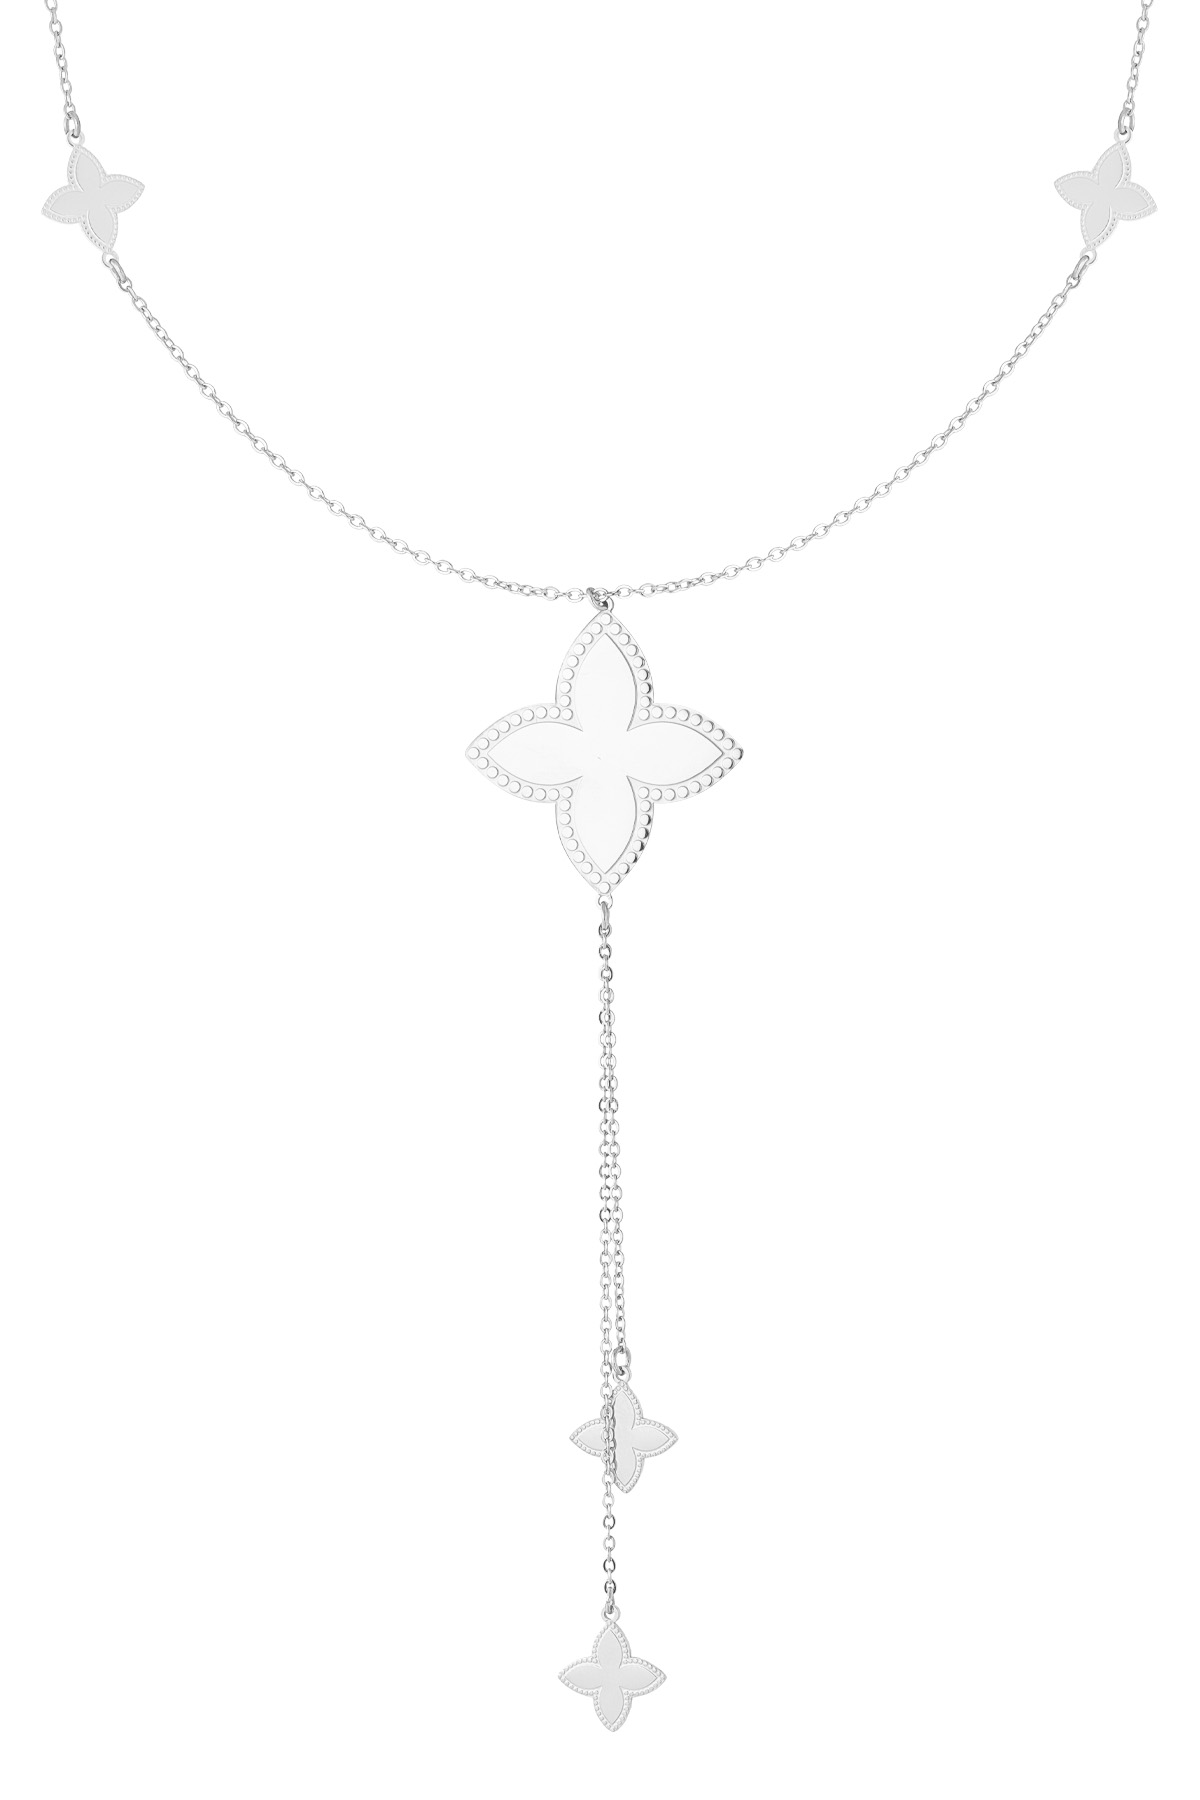 Long necklace with various clover charms - silver 